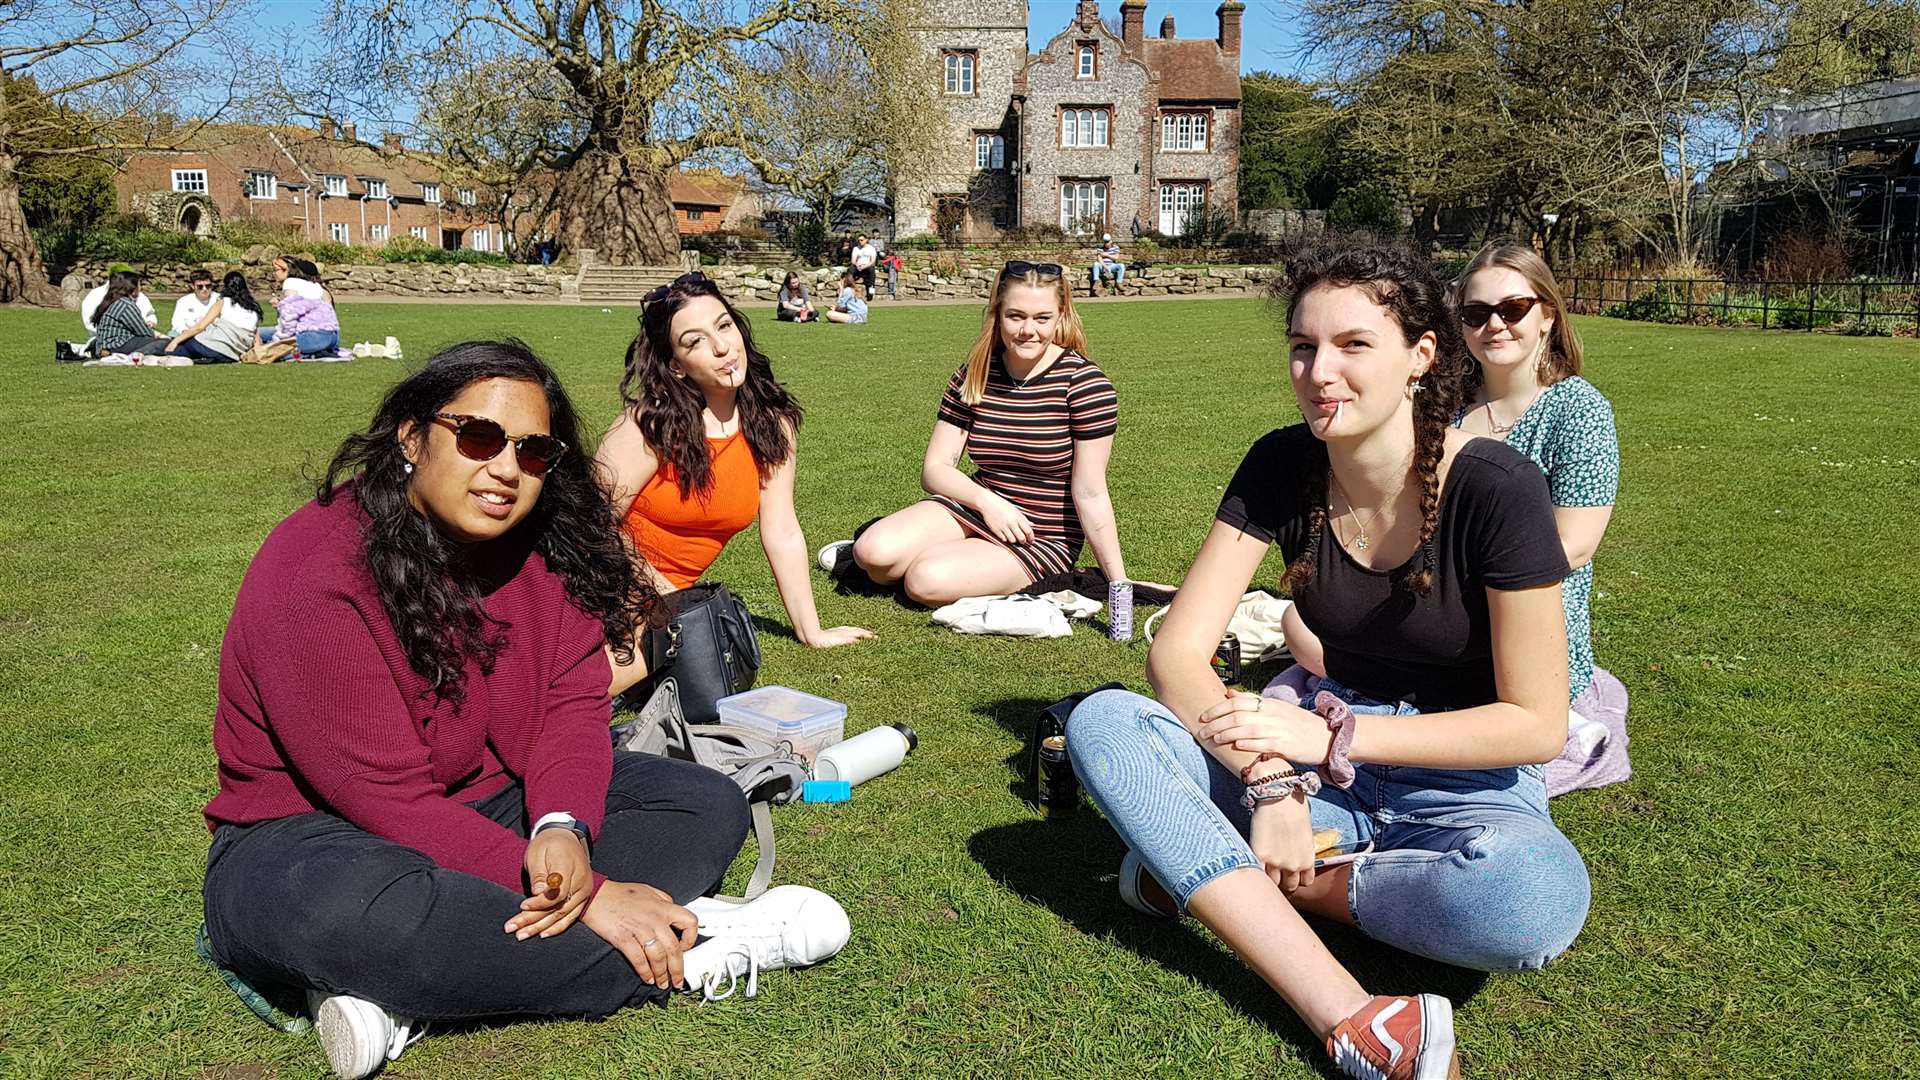 Students Naz Saddique, Demitra Michael, Anna Conlon, Anastasia Toseland and Olivia Vaughan also seized the opportunity to meet up outside for the first time in months